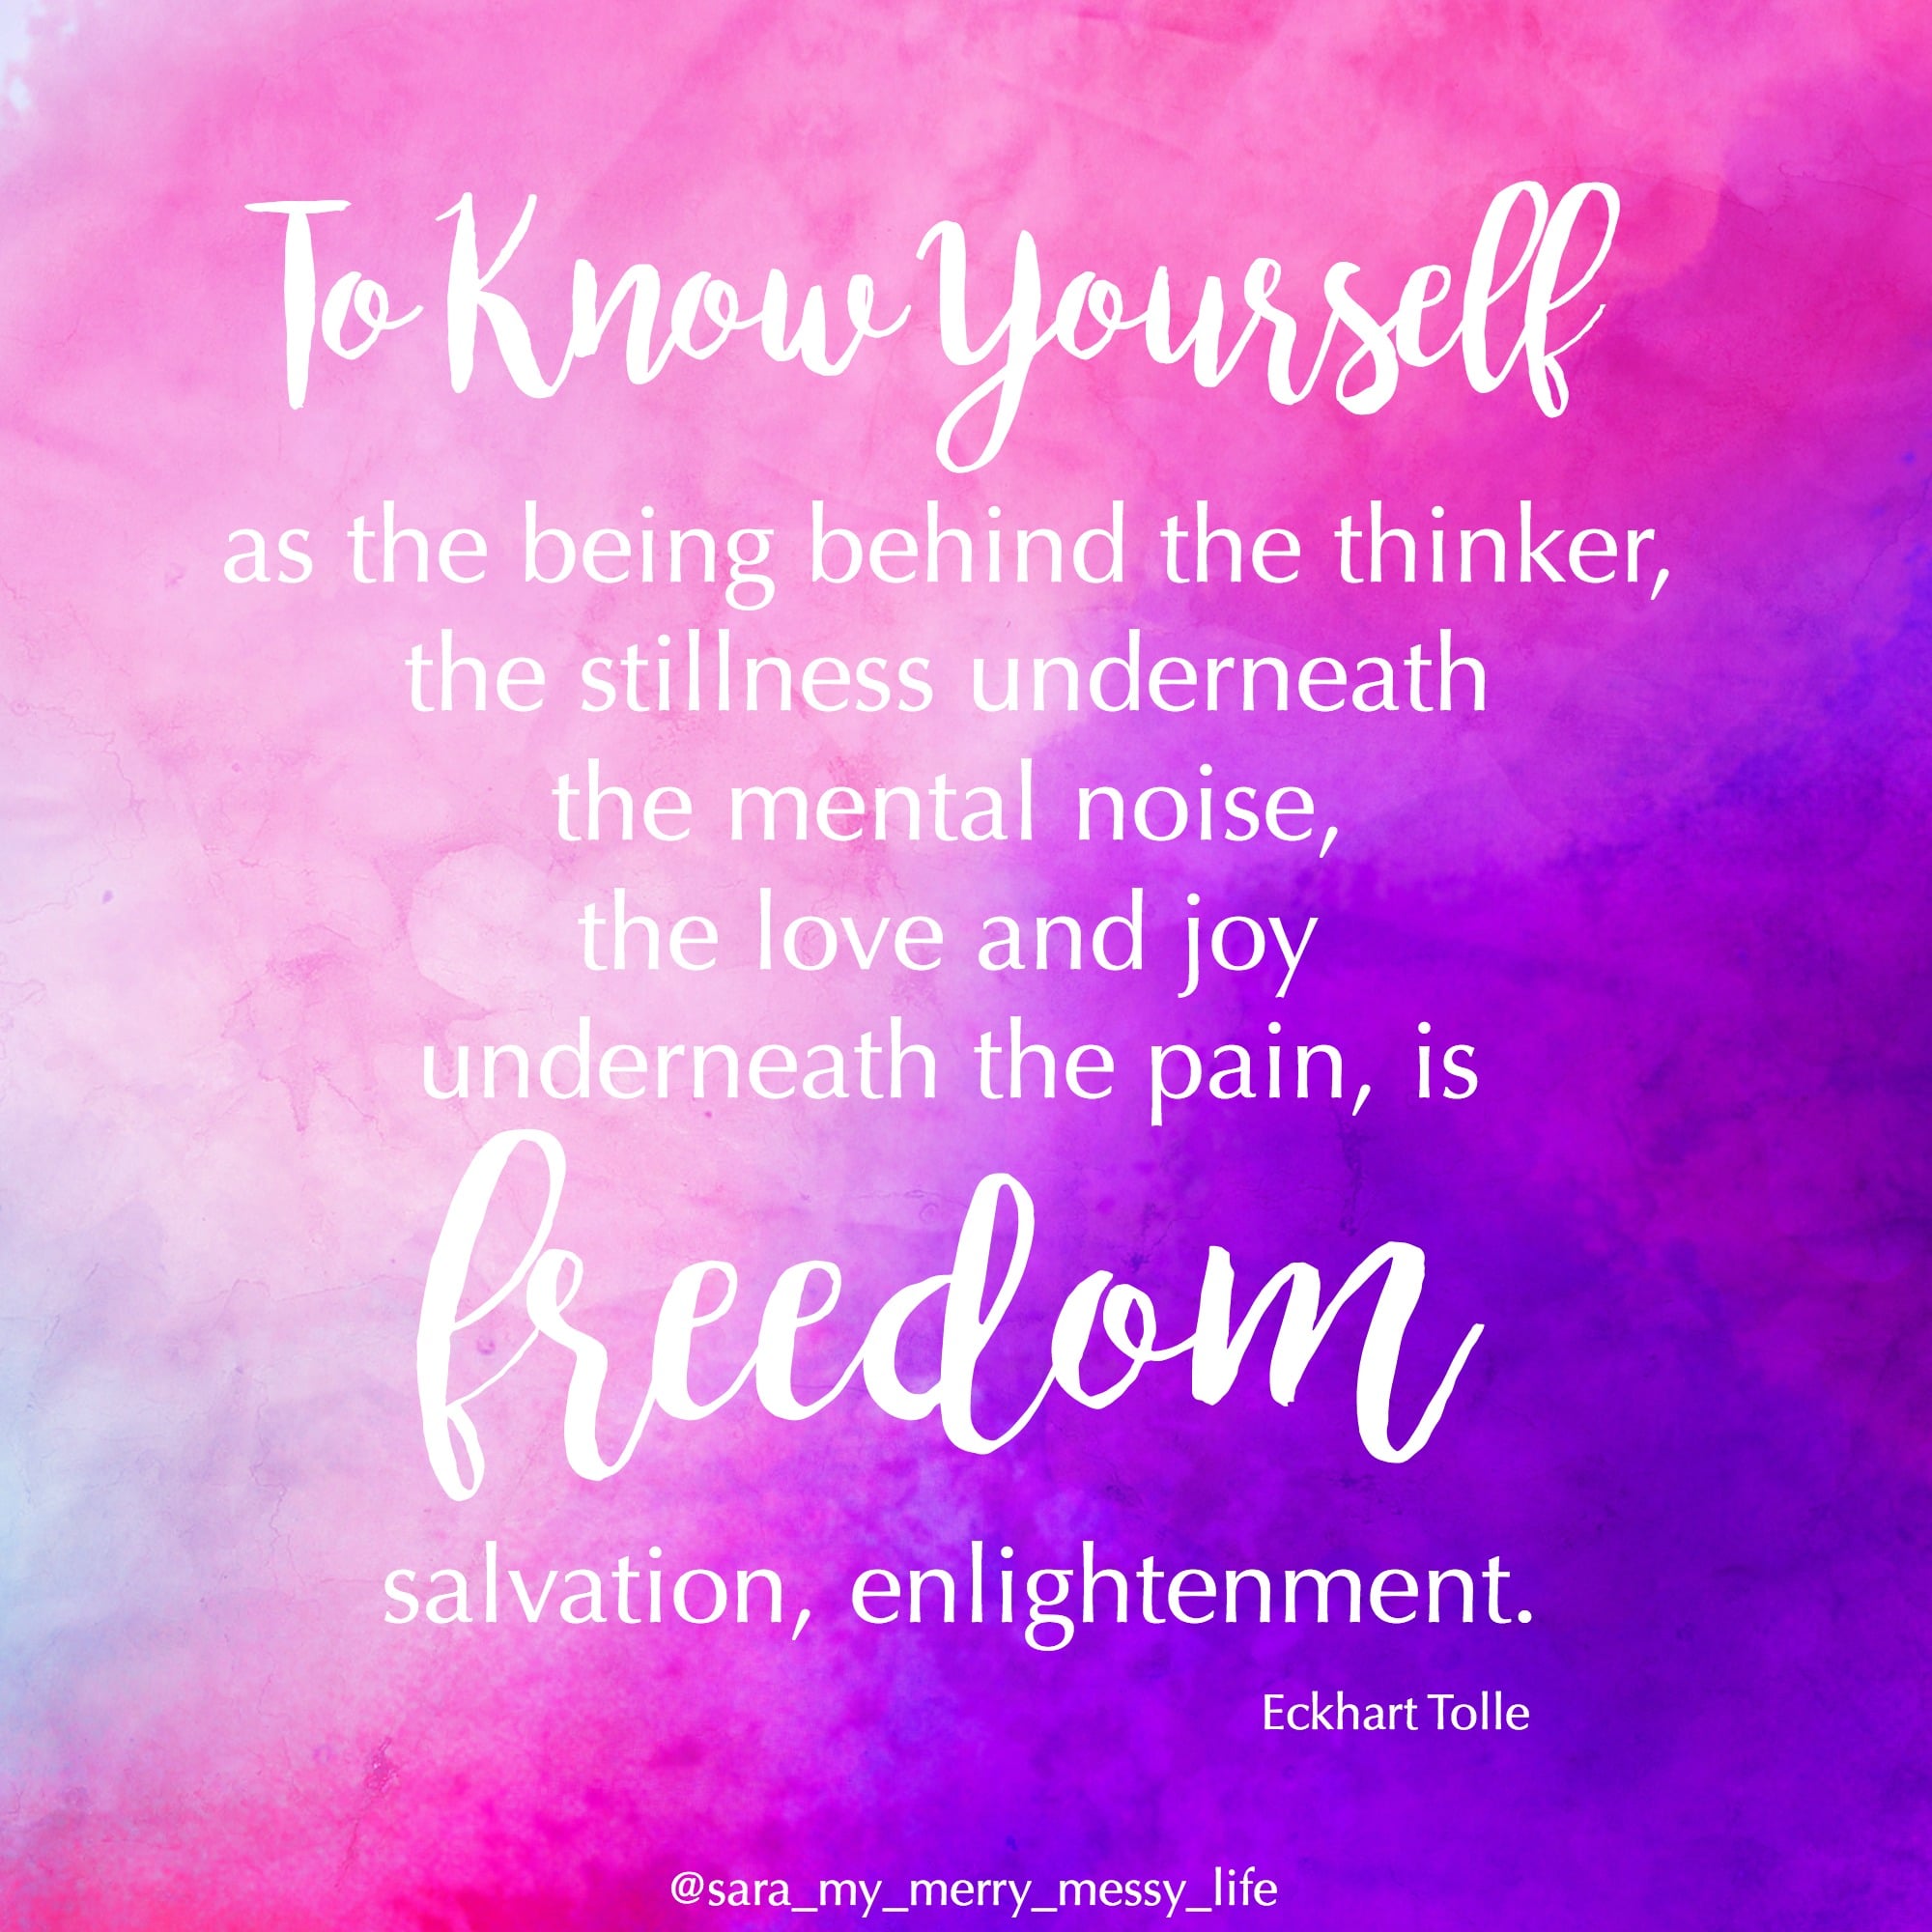 To know yourself - quote by Eckhart Tolle - Dressing Your Truth